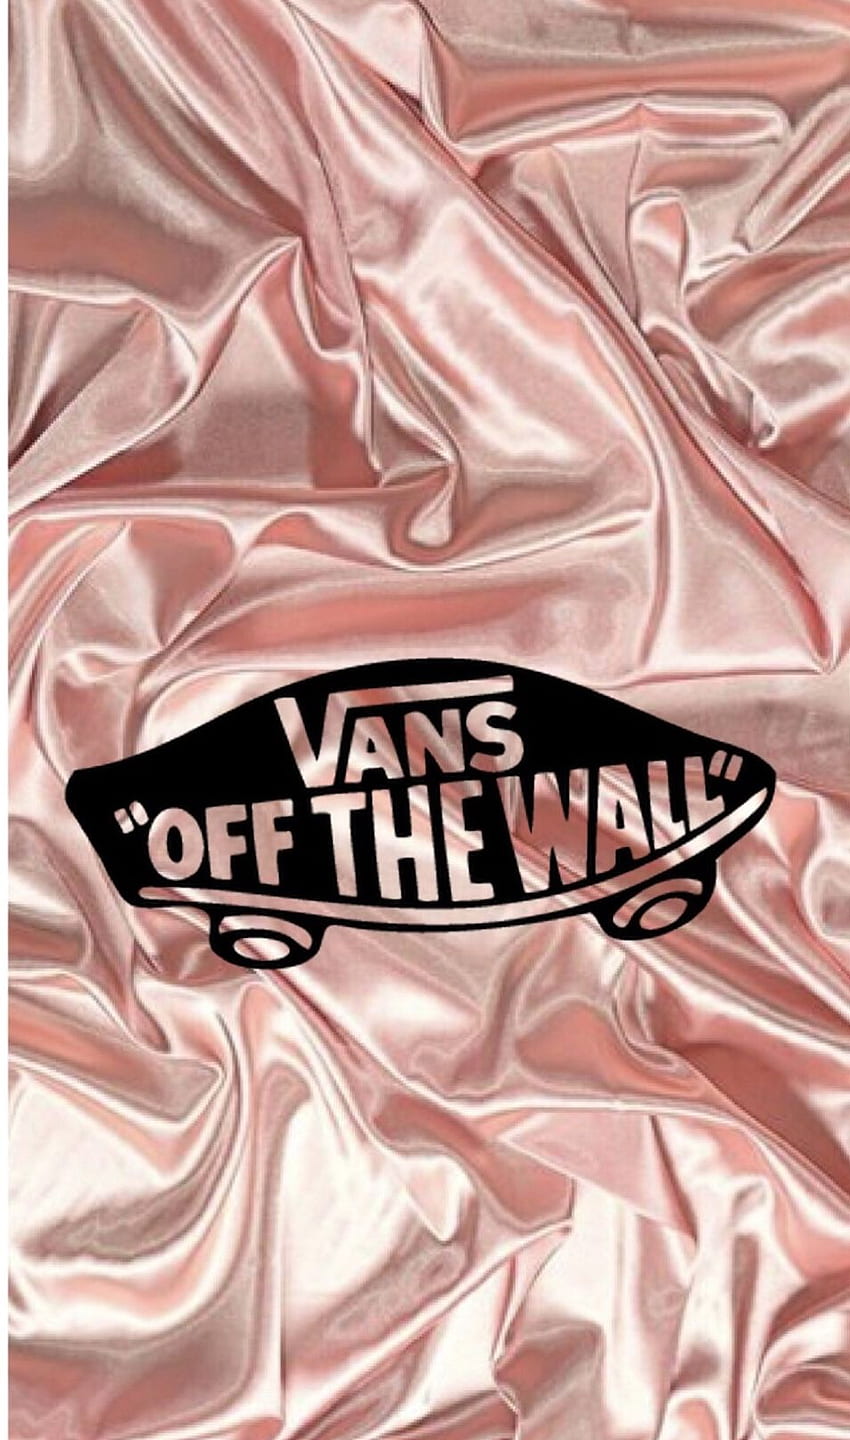 I saw this pink background and hadddd to use it! It's so cute! Then I went on Pic collage and added the vans logo HD phone wallpaper